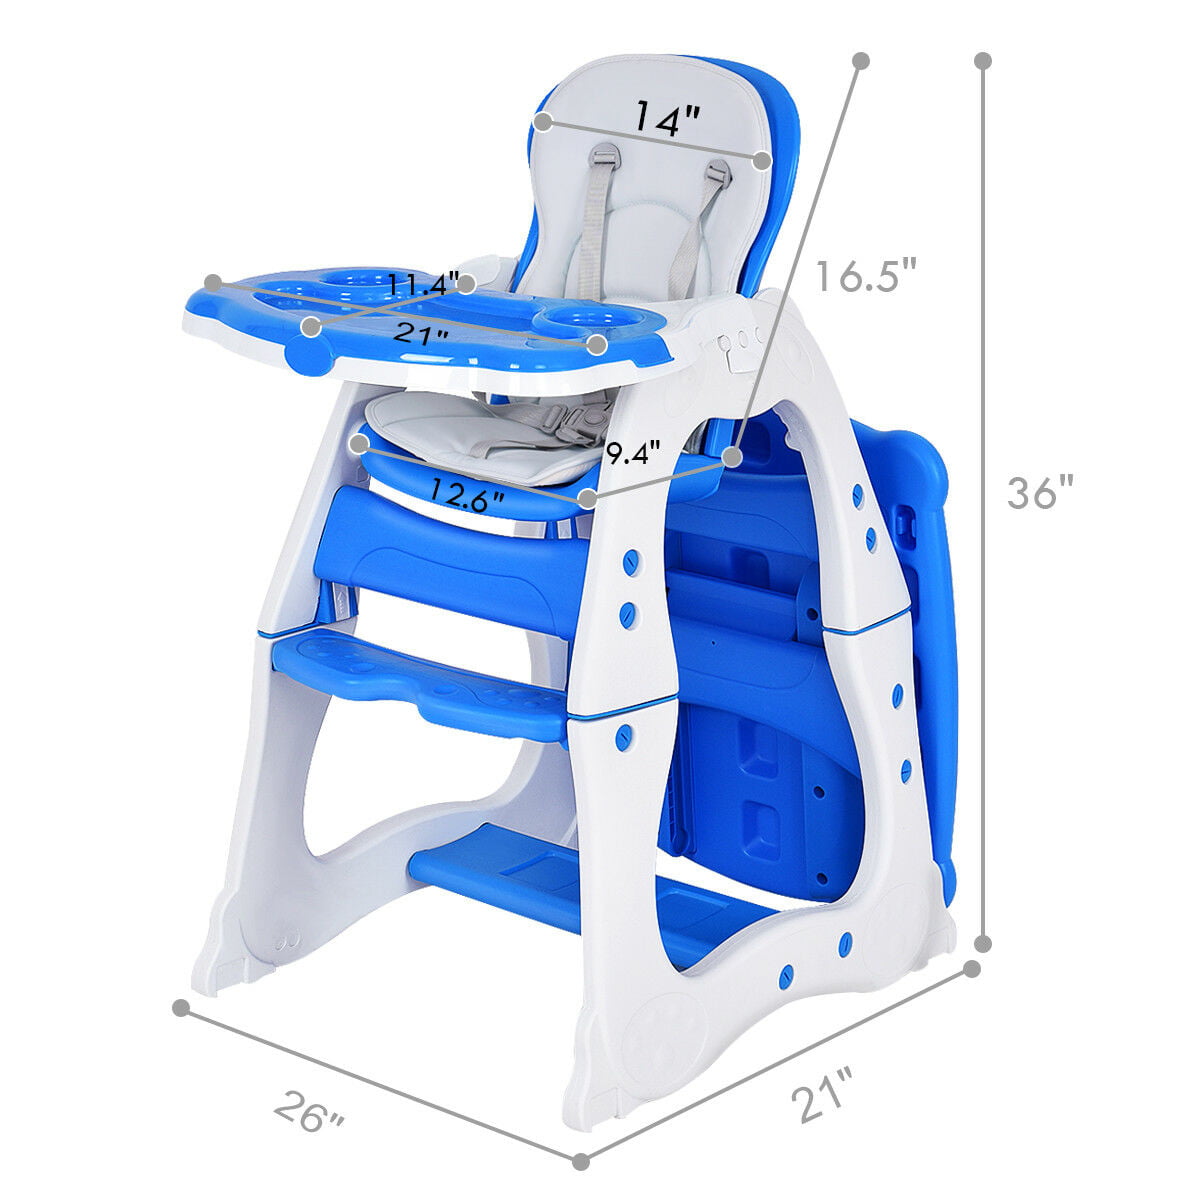 3 in 1 baby high chair convertible play table